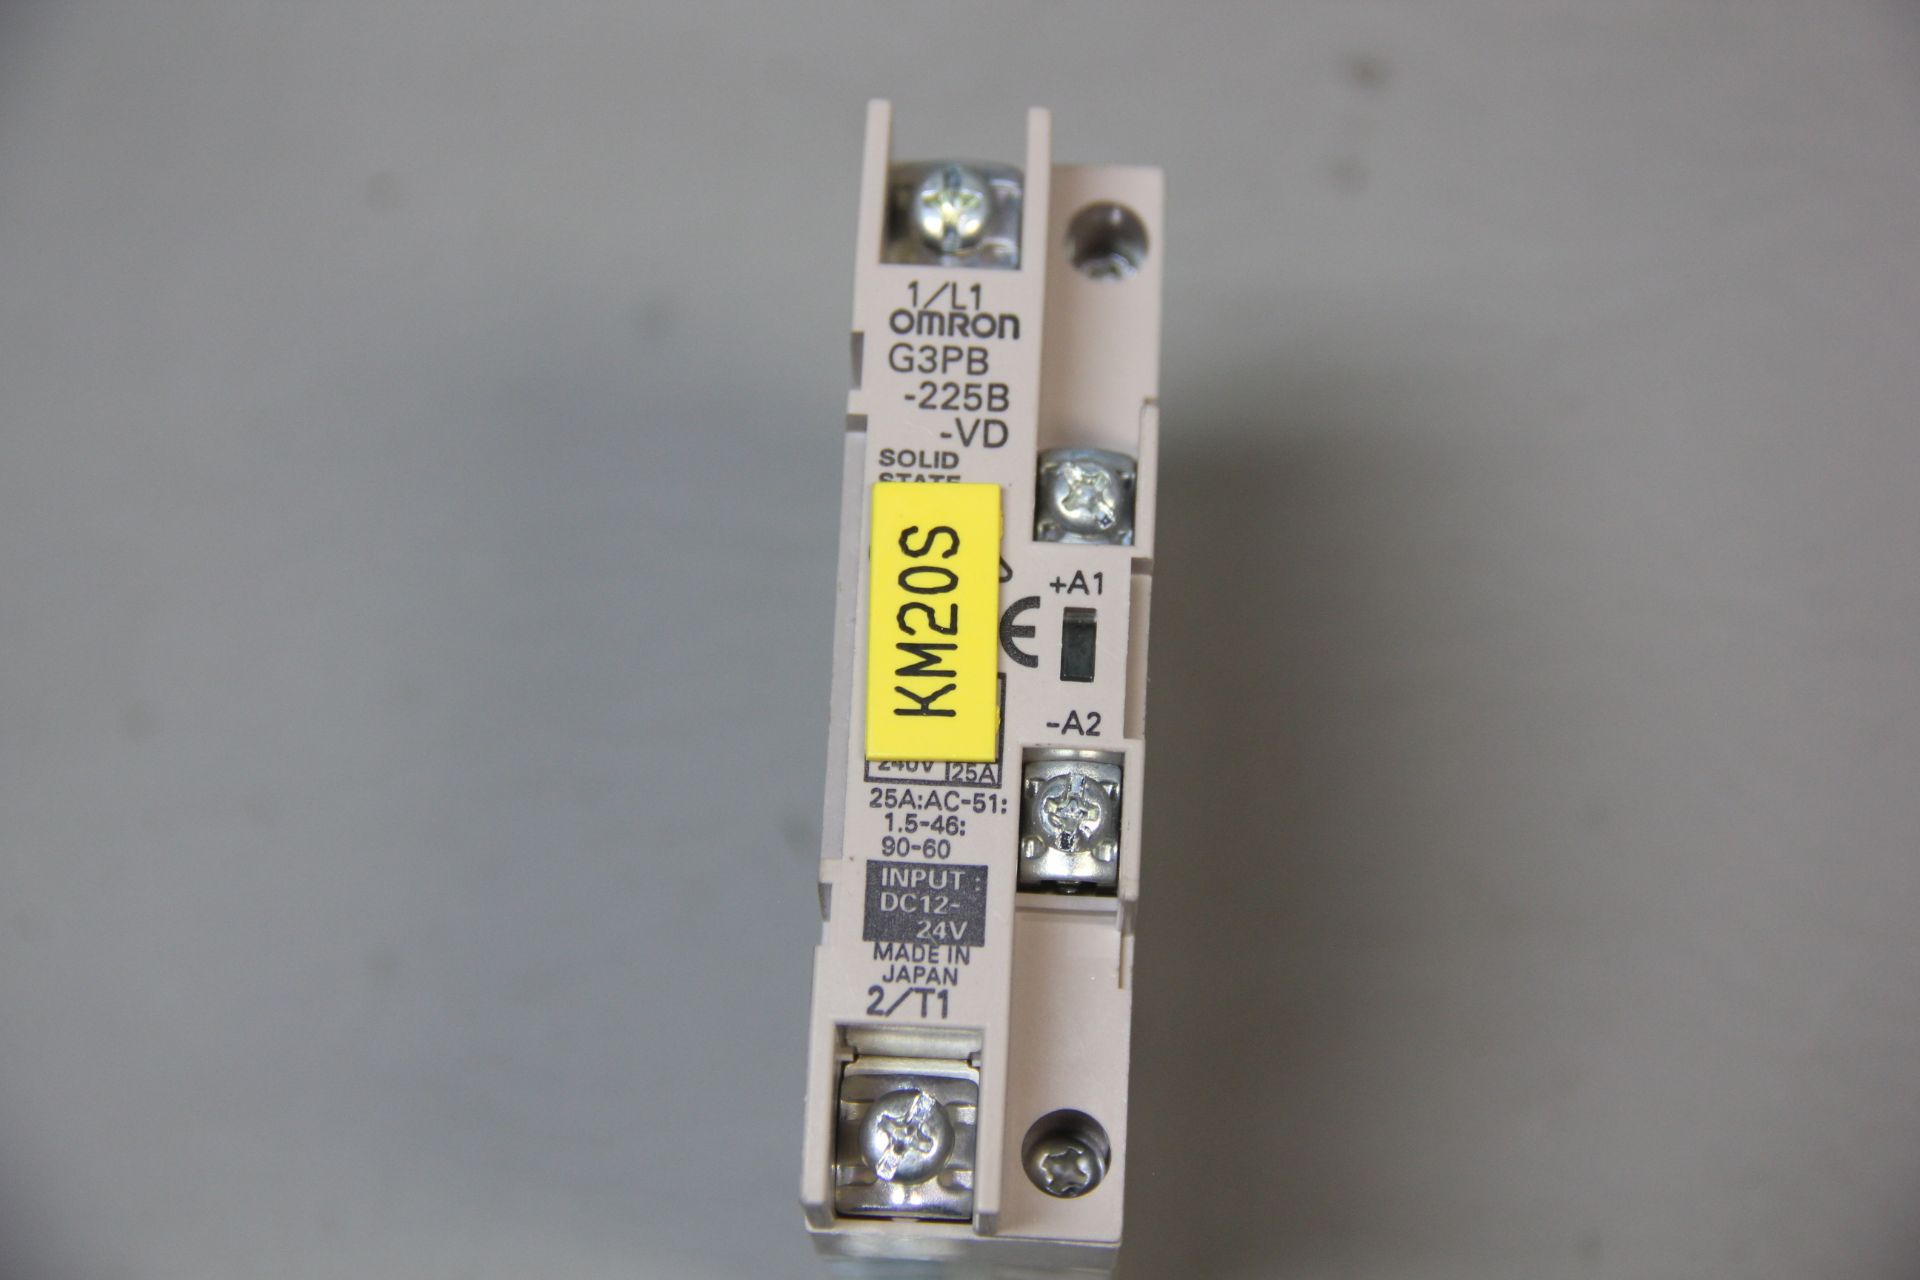 OMRON SOLID STATE RELAY G3PB-225B - Image 2 of 2